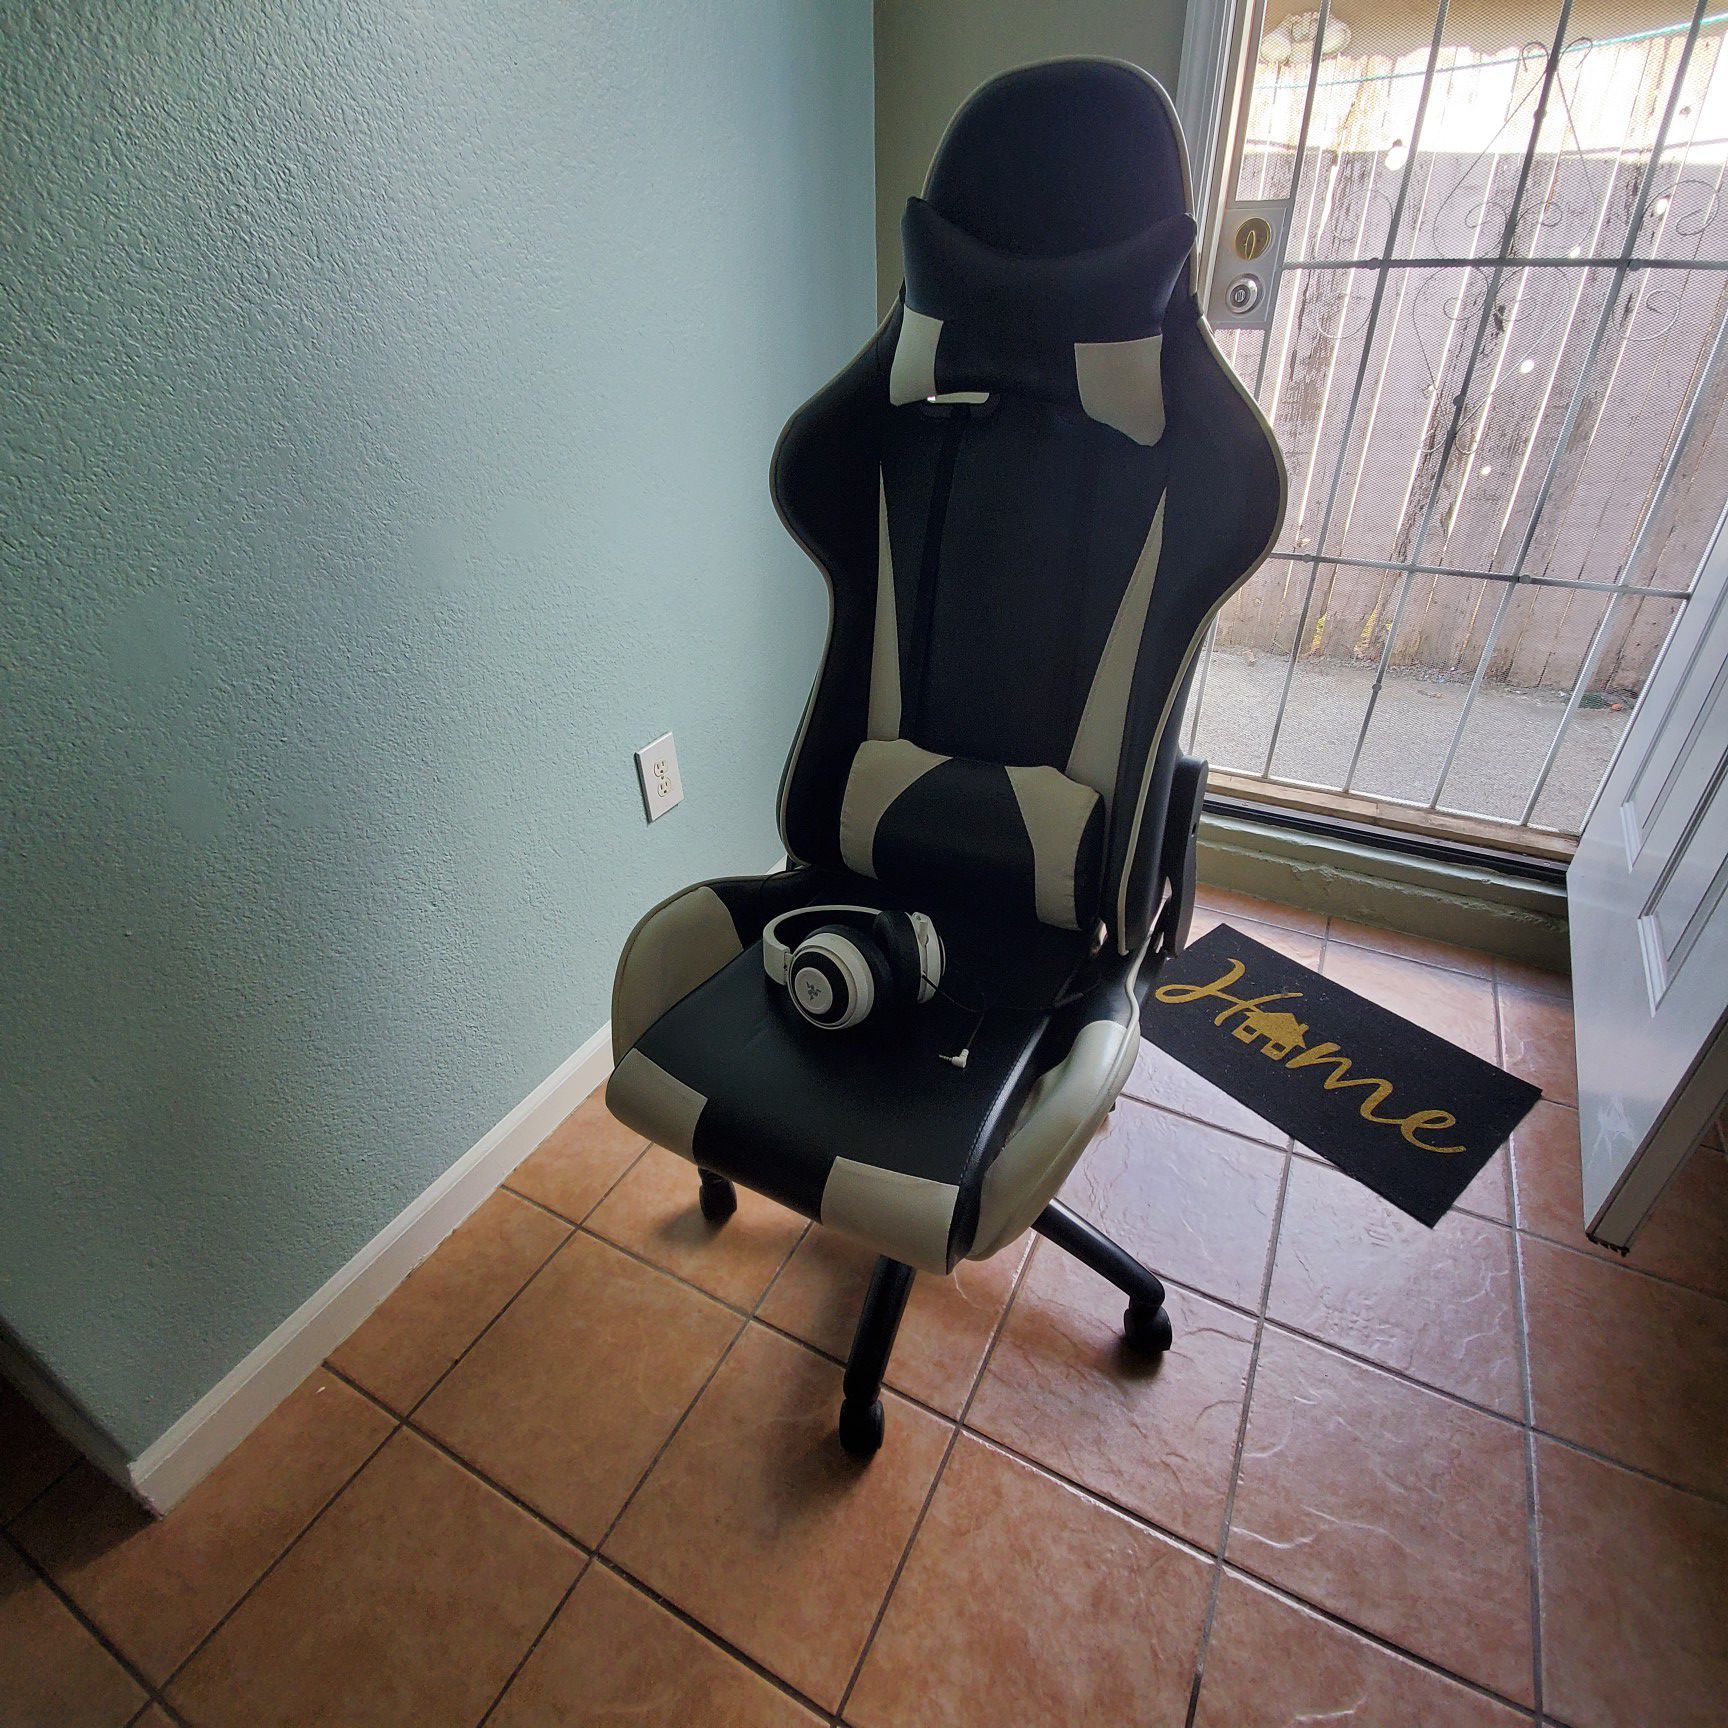 Gaming chair and razer headsets